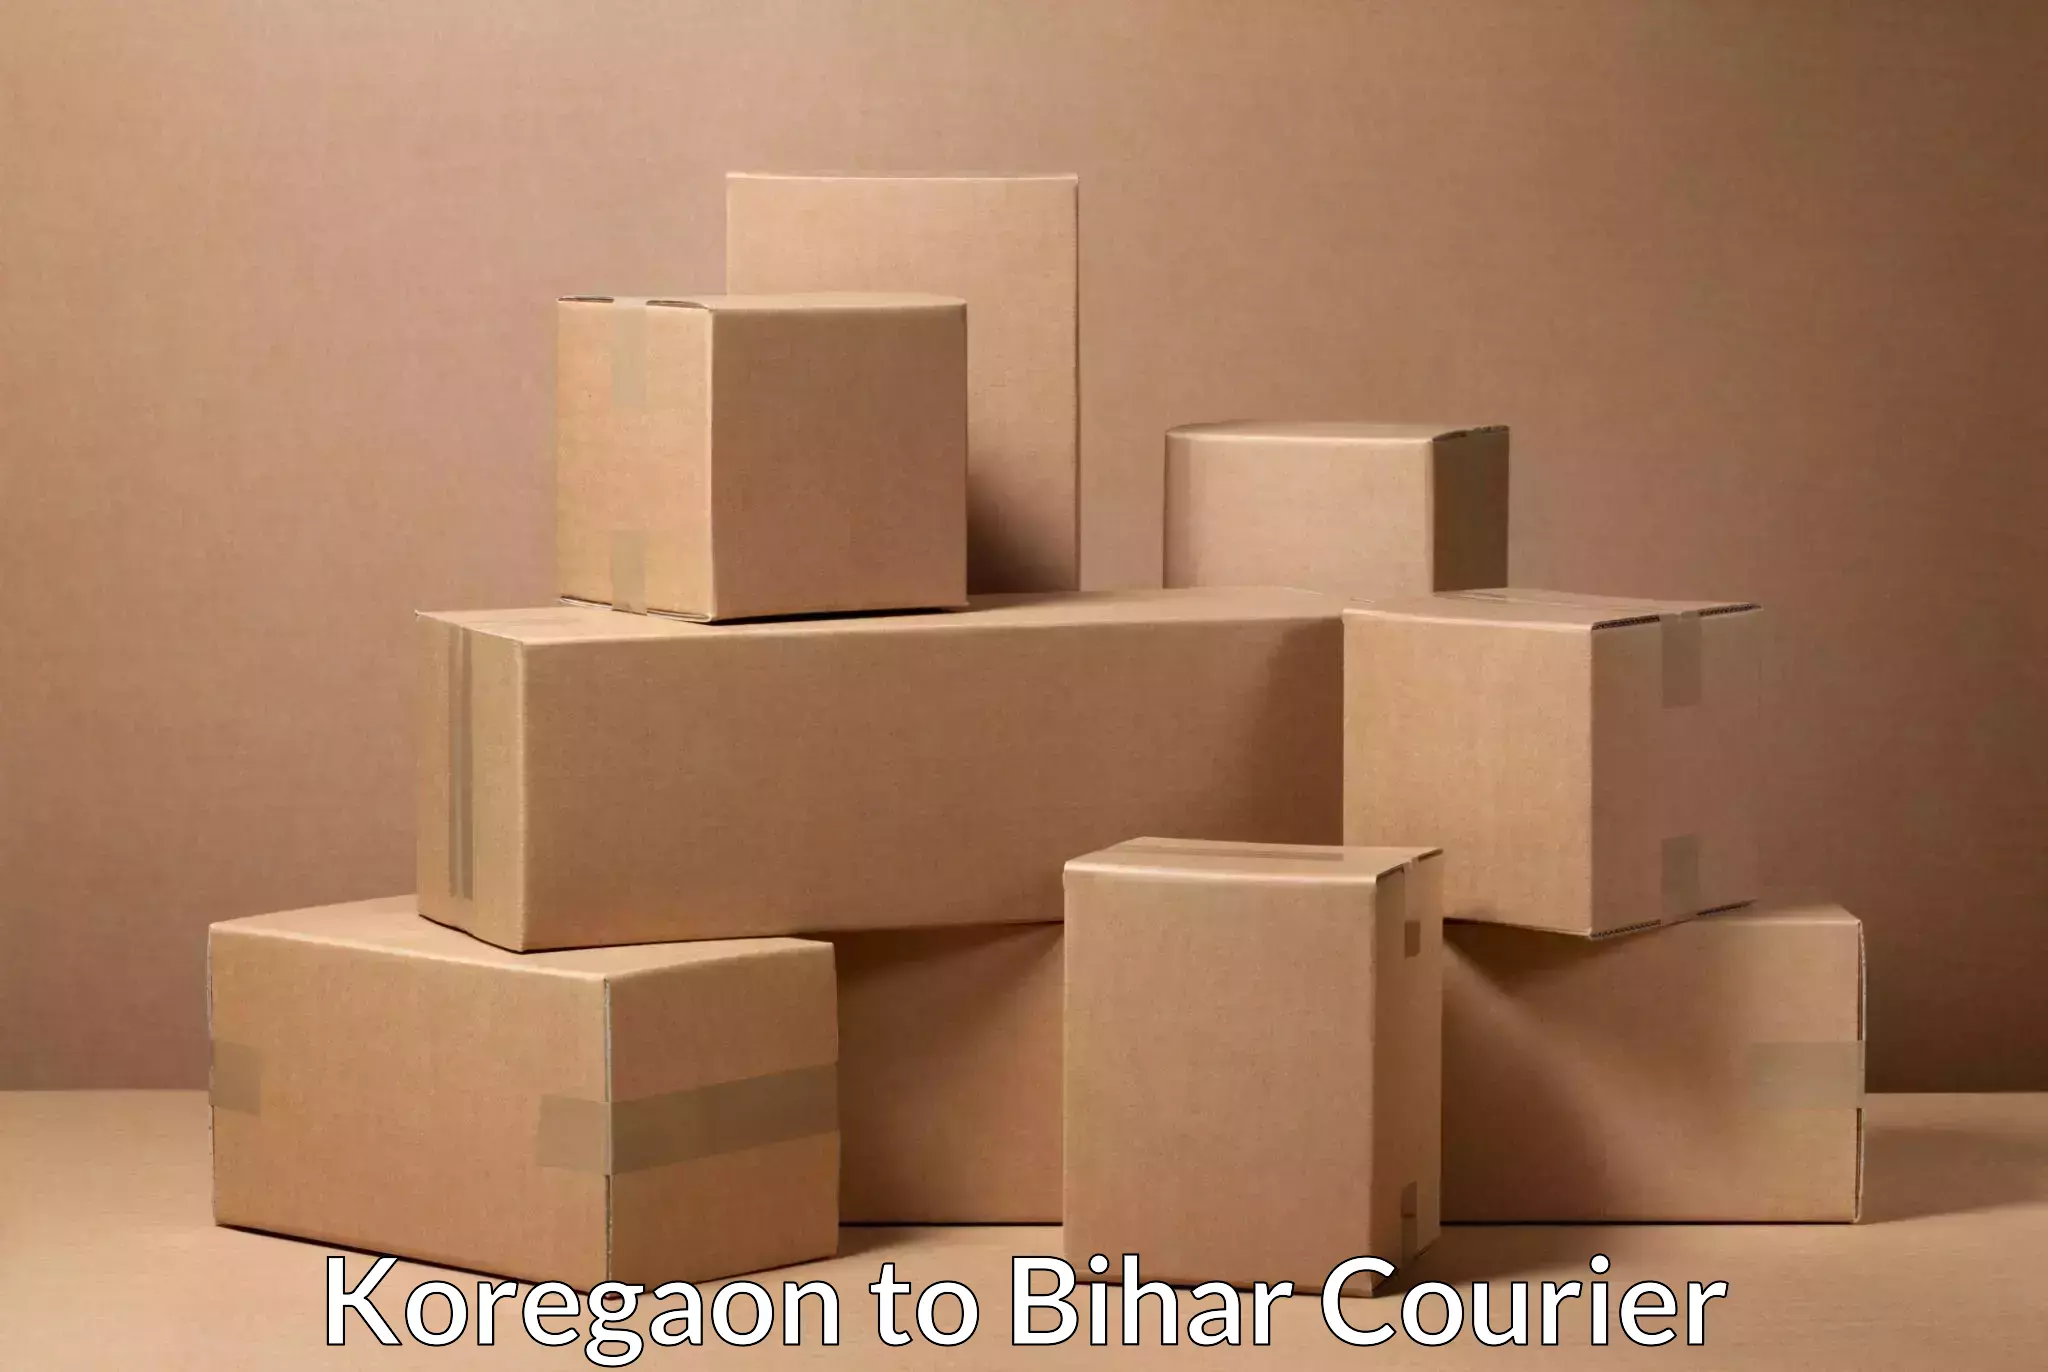 State-of-the-art courier technology Koregaon to Lauria Nandangarh